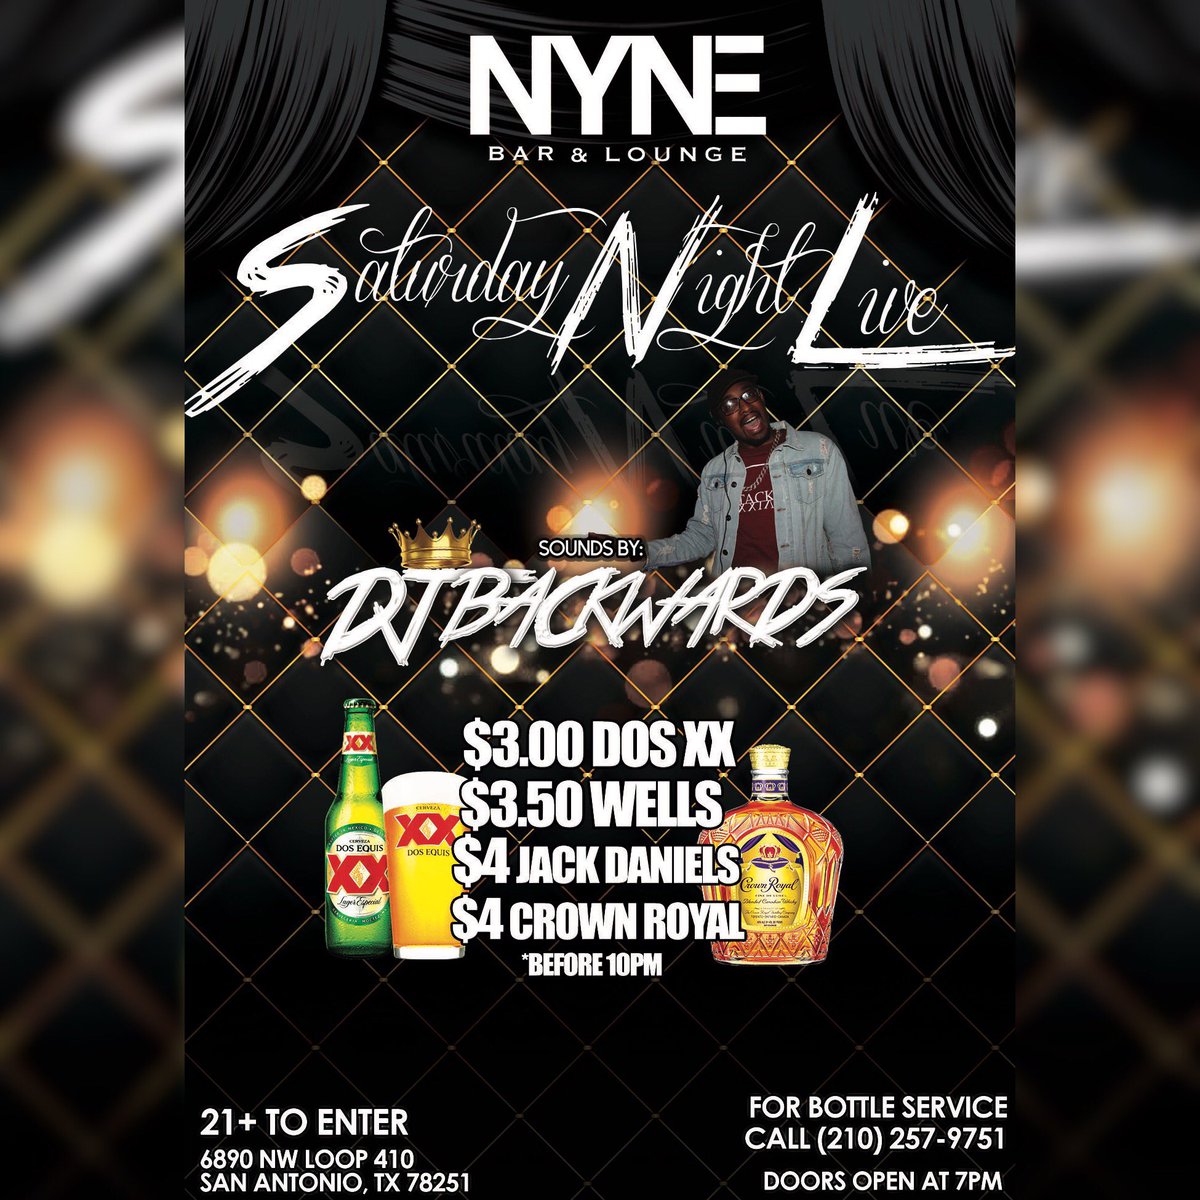 Nyne Bar Lounge On Twitter No Cover No Cover 2 For 22 Hookahs Drink Specials And Dj Backwards In The Mixx Tonight Nyne Bar Lounge Sanantonio Hookah Https T Co 3nfxjmiht4